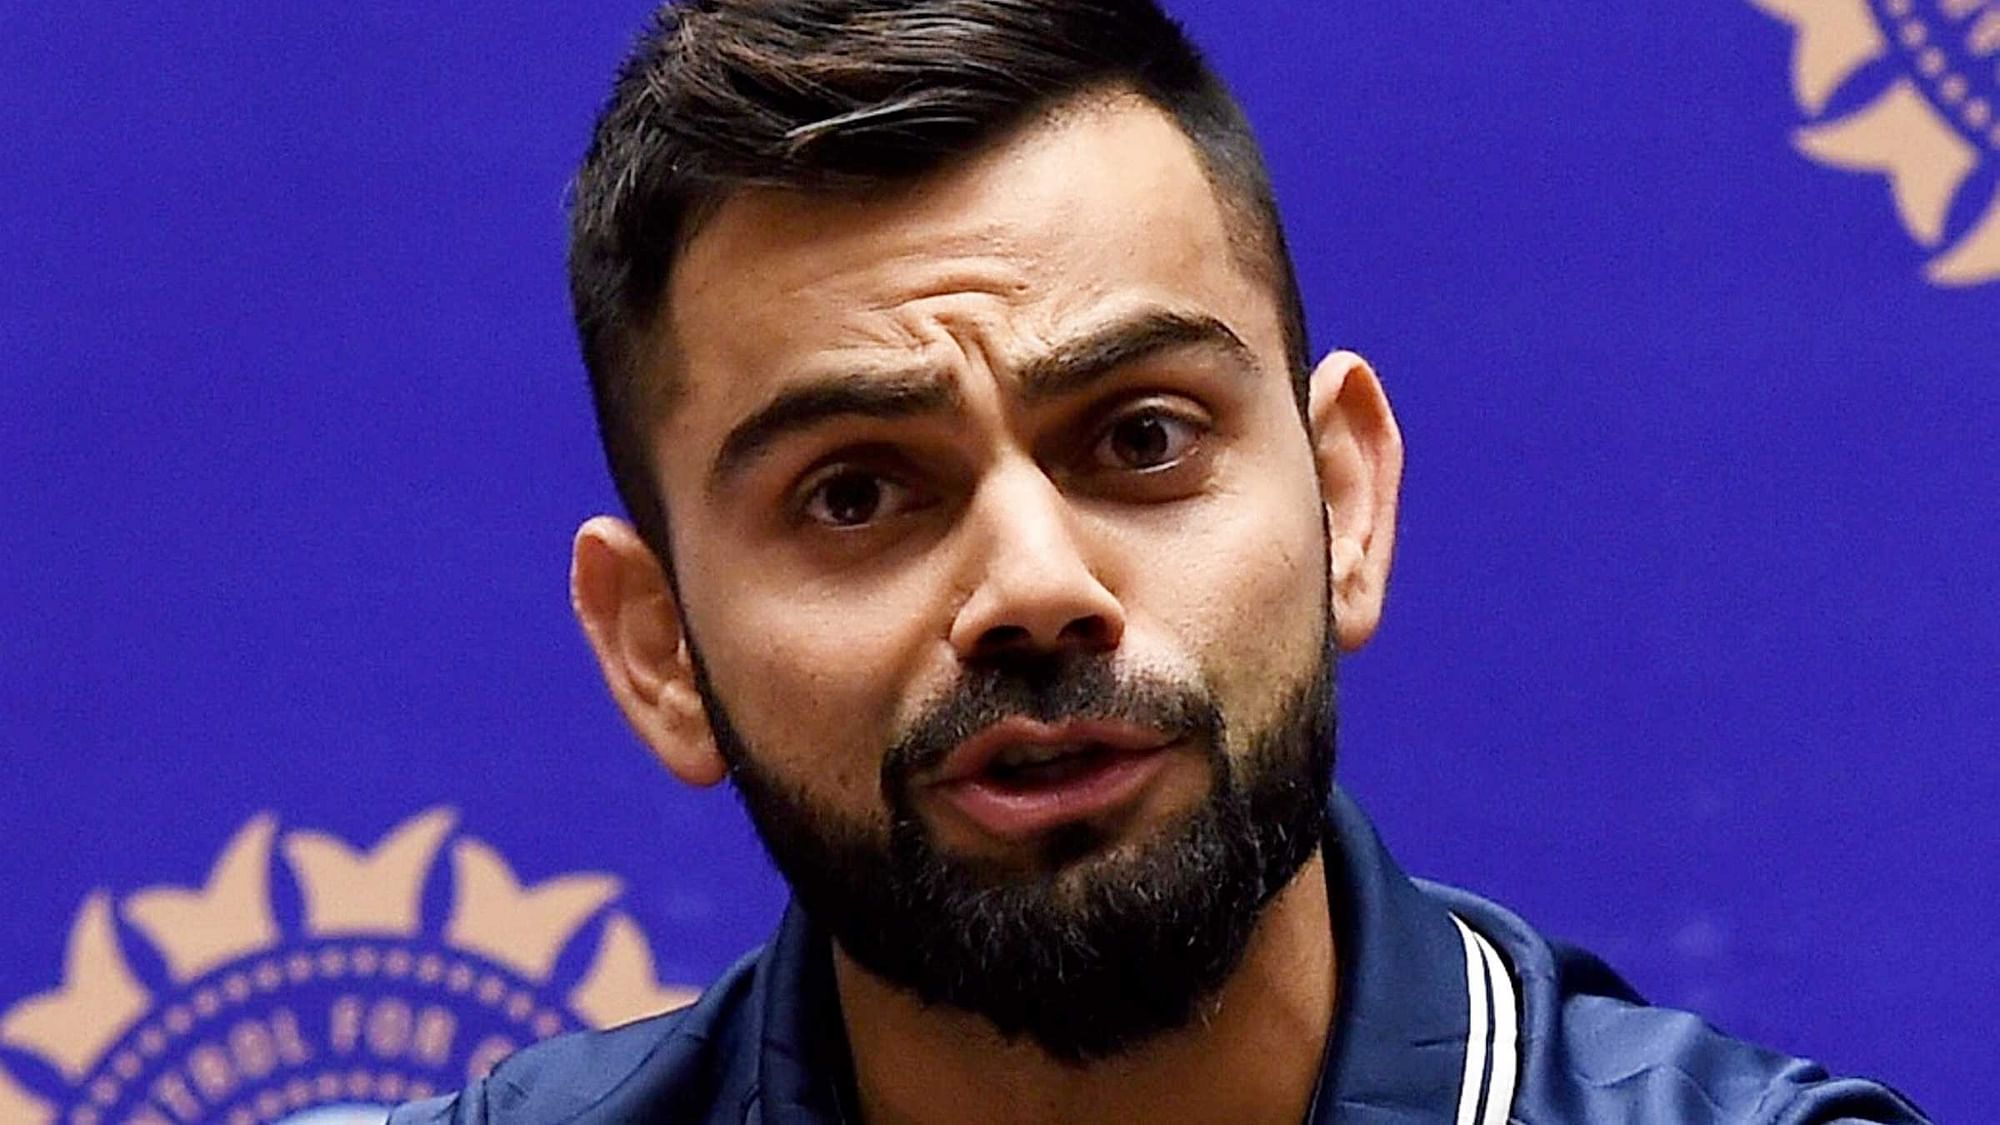 Virat Kohli spoke for the first time about Anushka before the team’s pre-departure press conference.